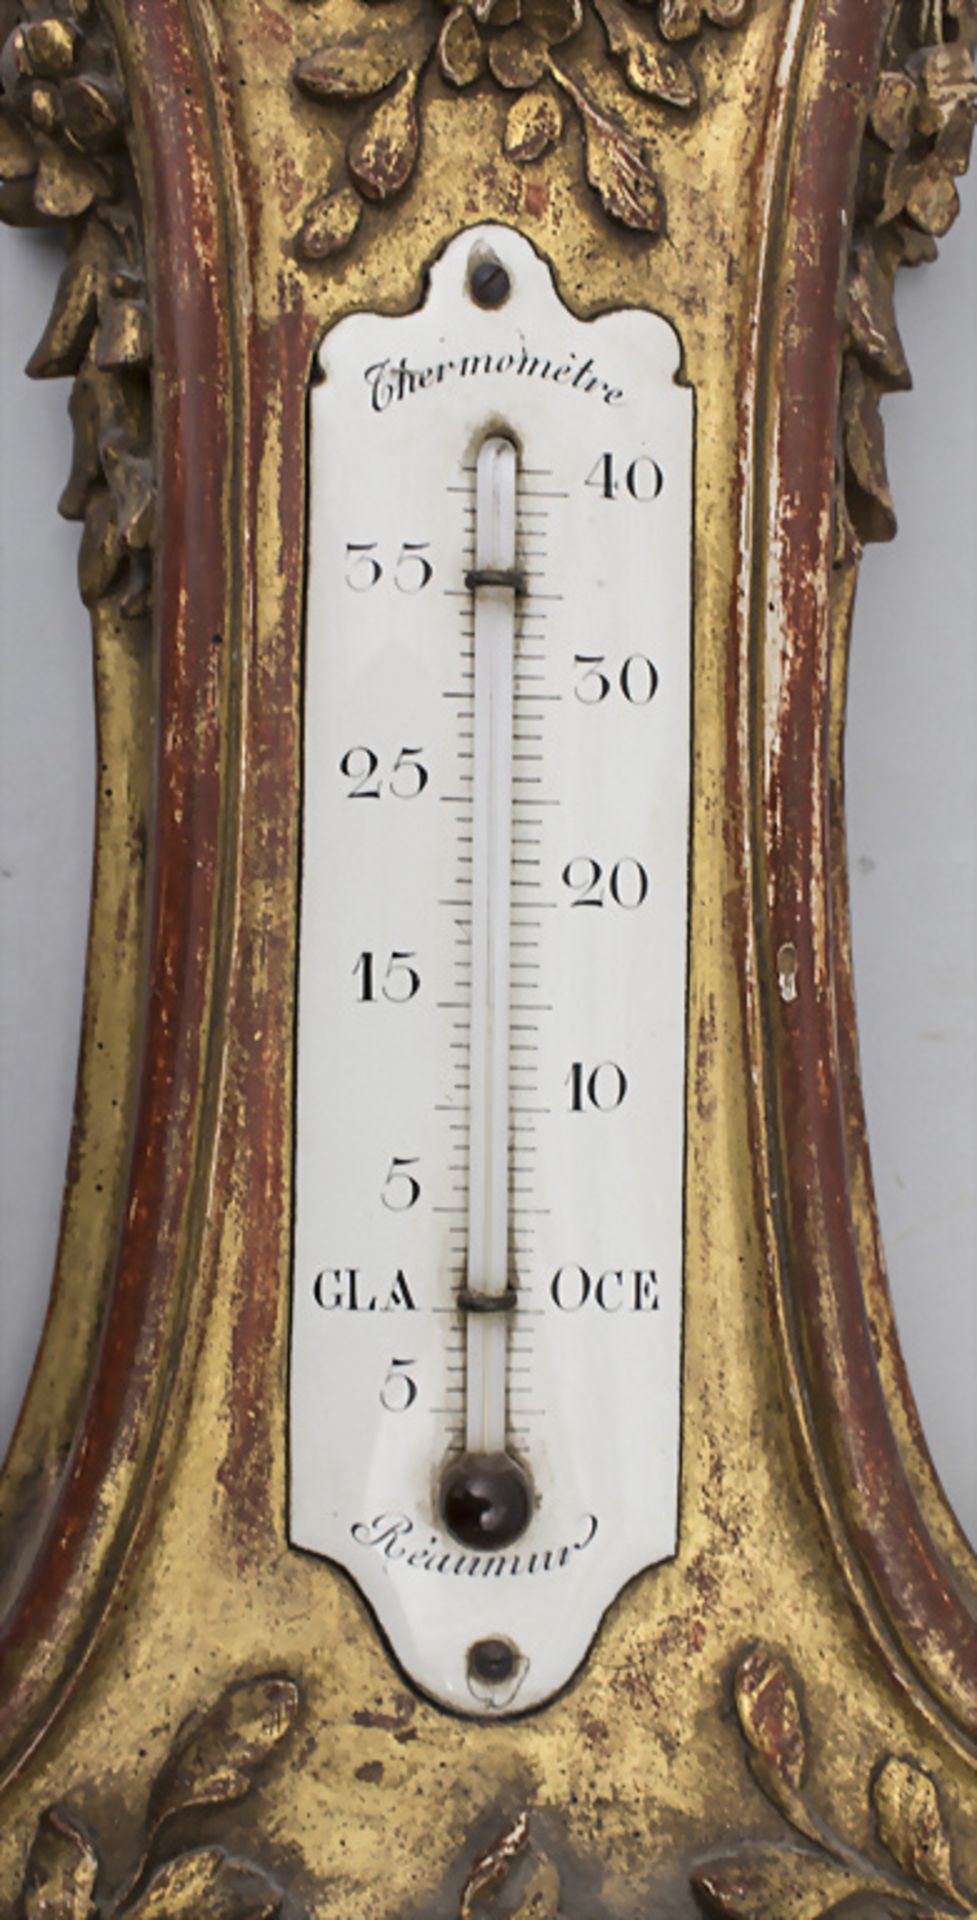 Louis-Seize Wanduhr mit Wetterthermometer / Louis XVI wall clock with weather thermometer, ... - Image 6 of 7